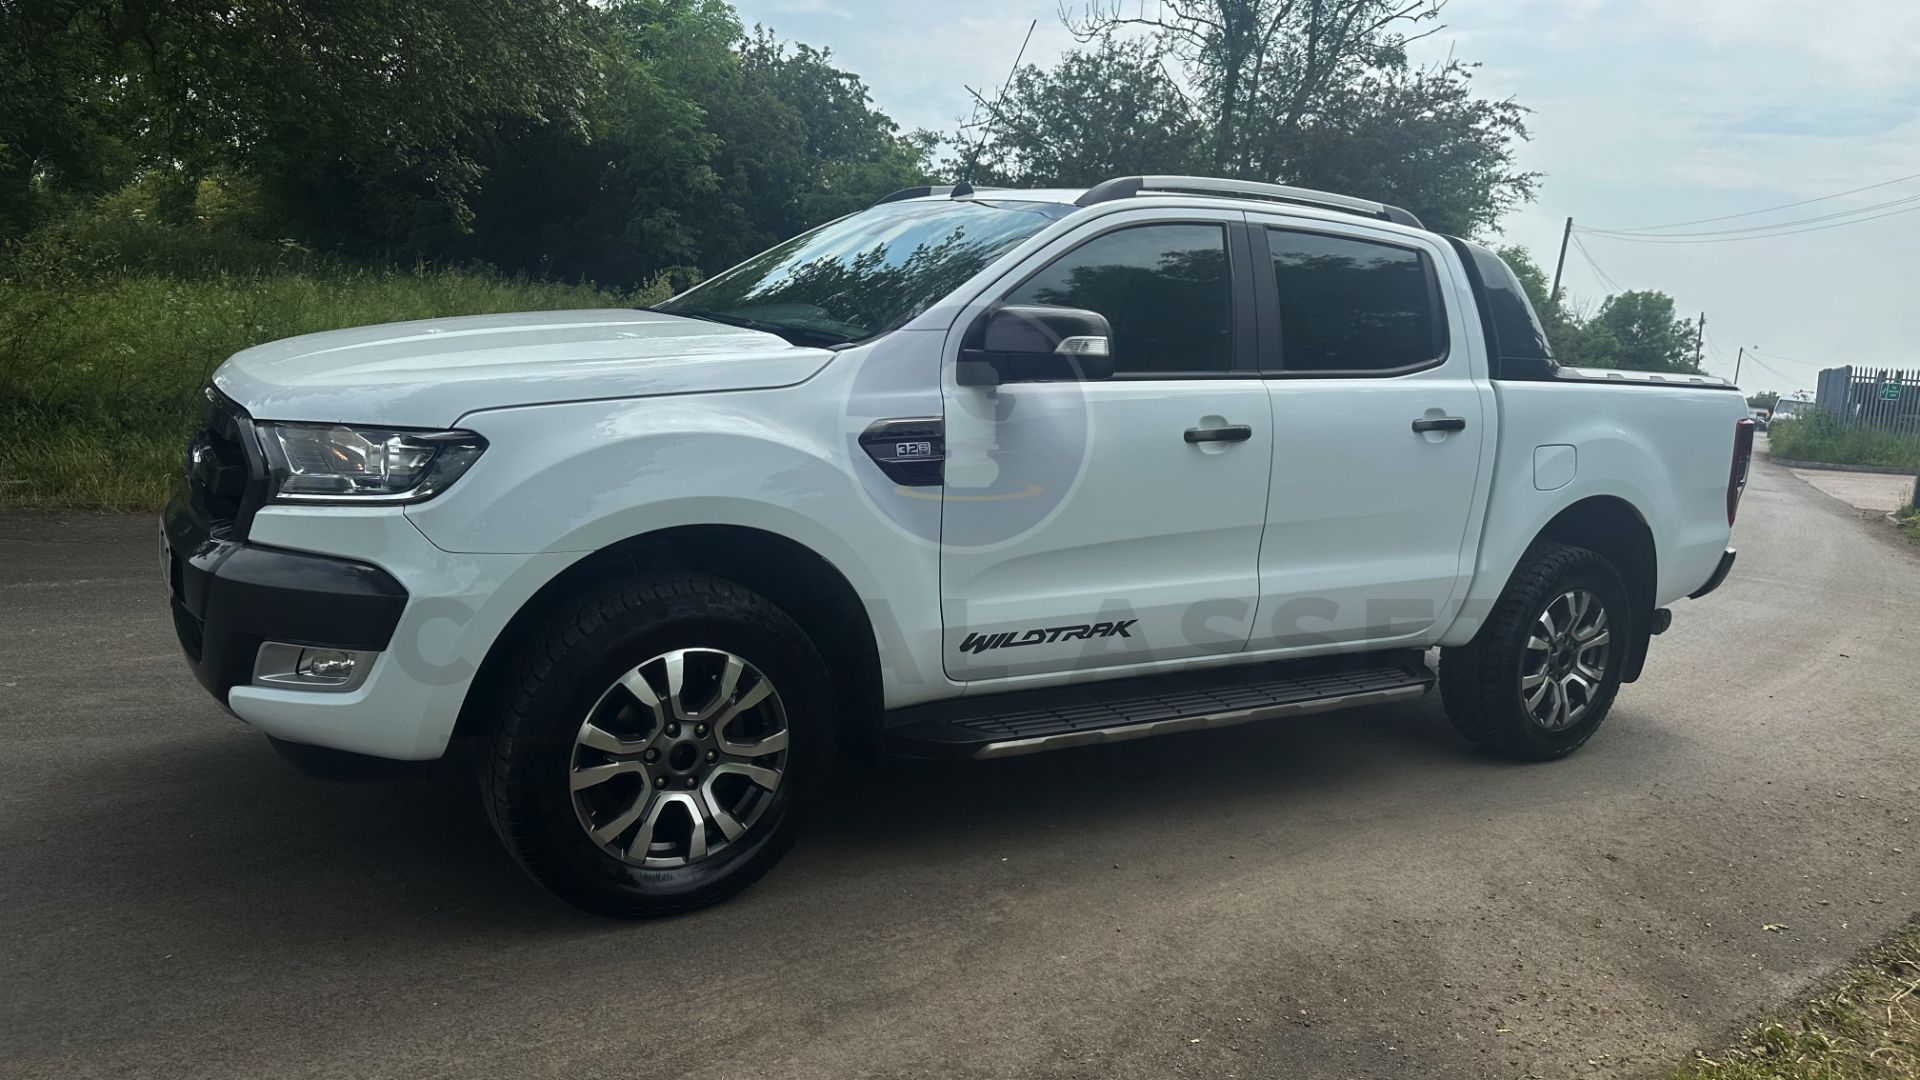 (ON SALE) FORD RANGER *WILDTRAK* DOUBLE CAB PICK-UP (2019 - EURO 6) 3.2 TDCI - AUTOMATIC (1 OWNER) - Image 7 of 50